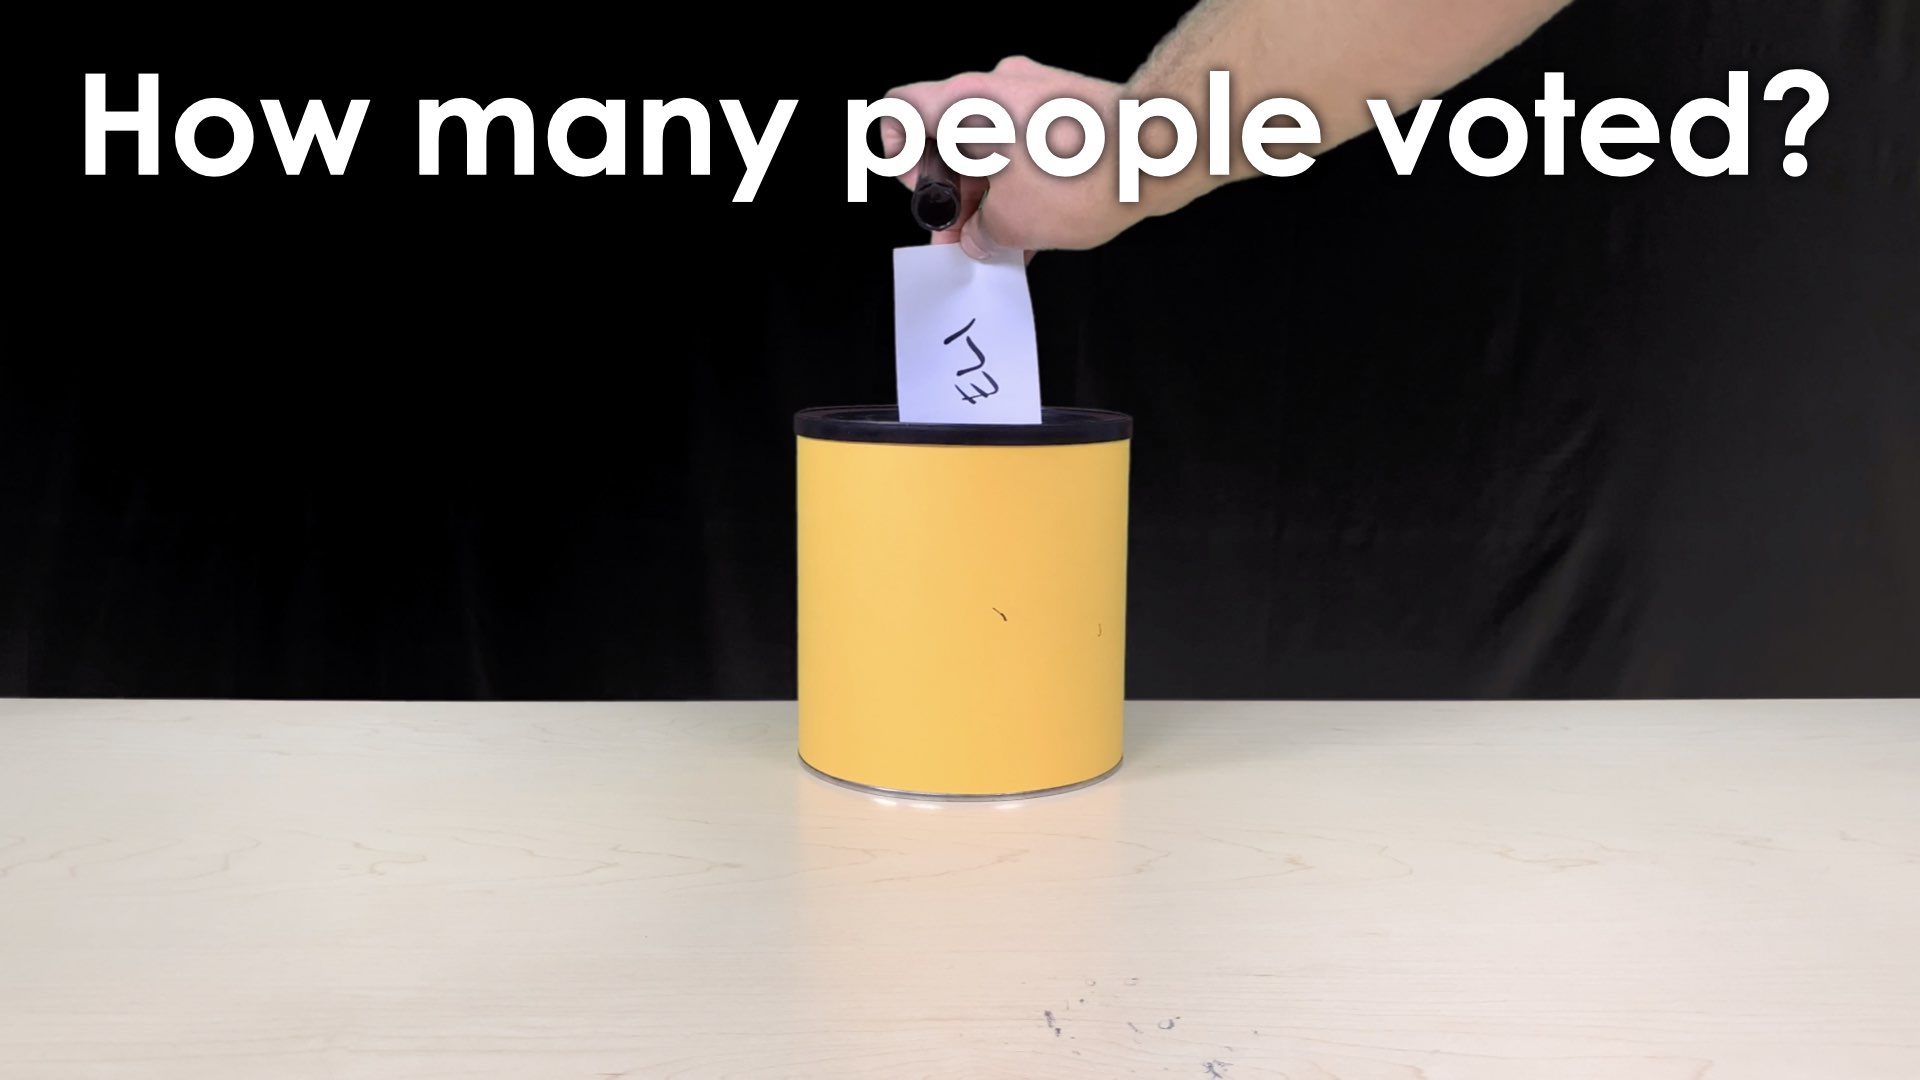 MMM Voting Booth Lesson.013 SPARK Prompt - How many people voted (1)